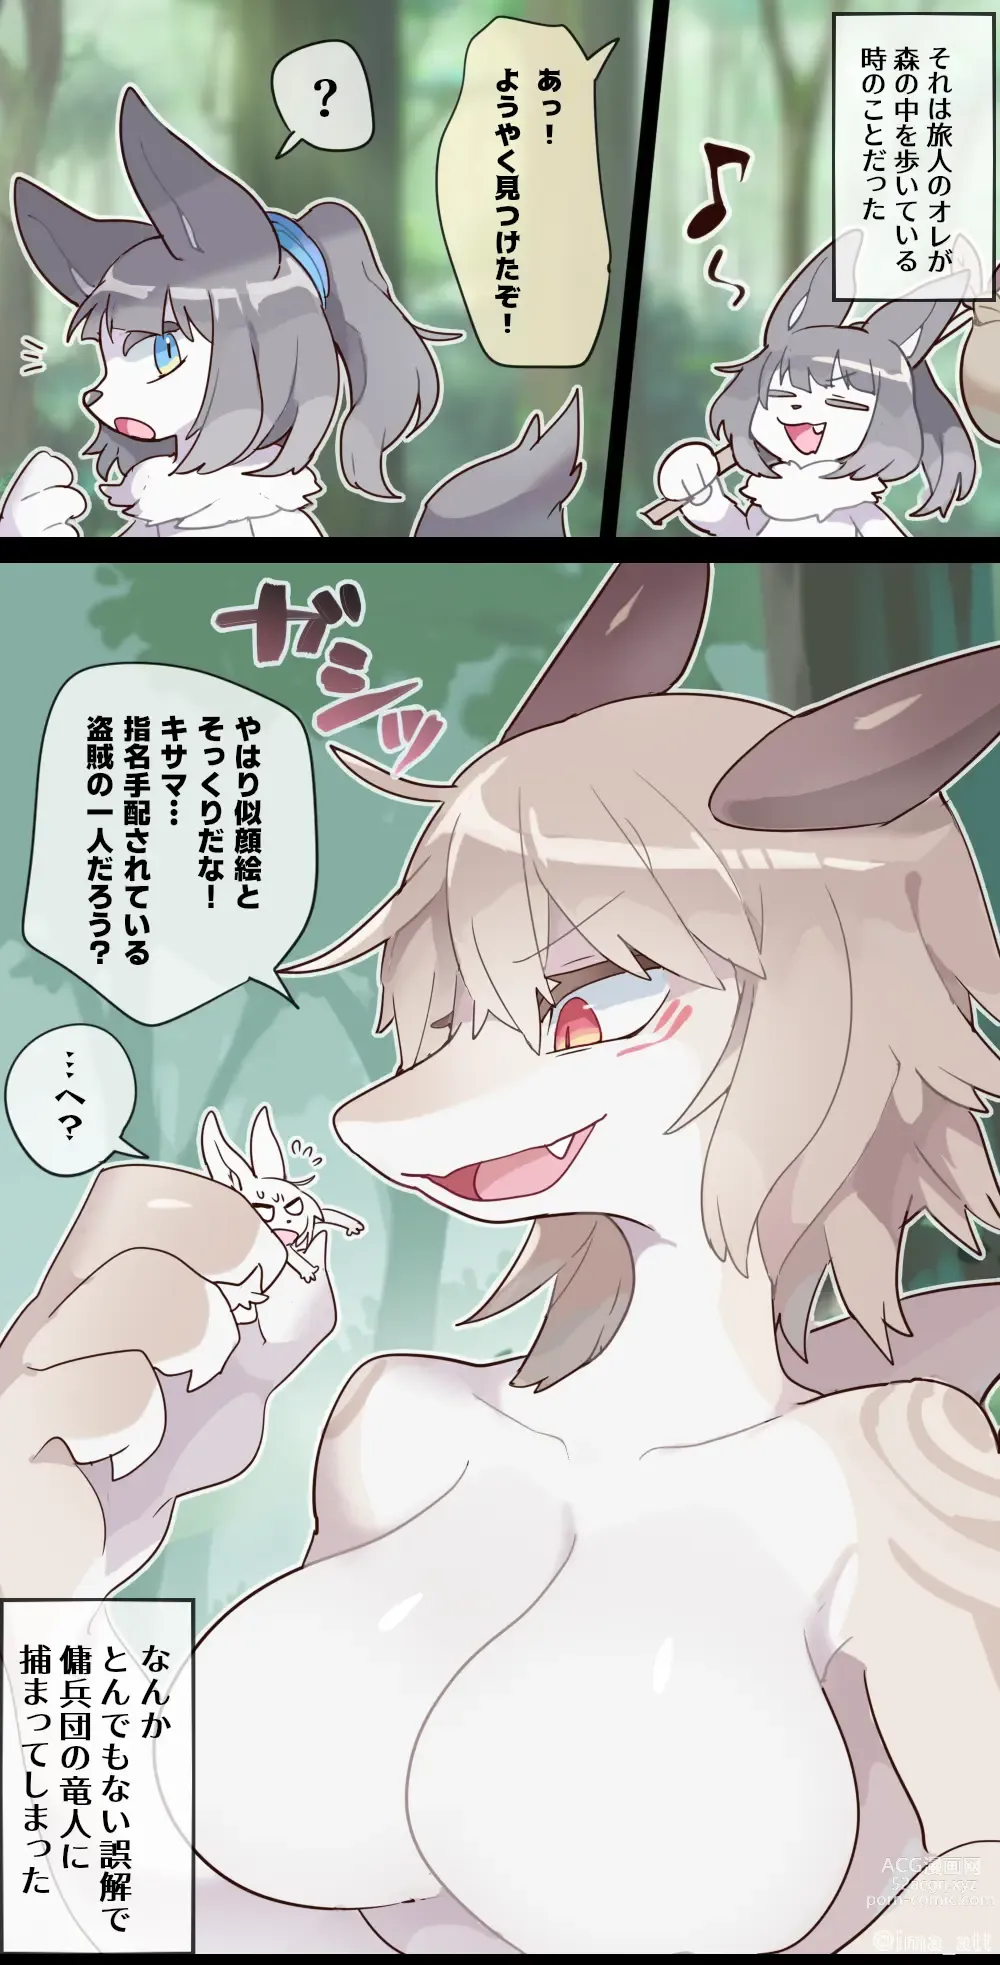 Page 9 of doujinshi Giant Dragonewt VORE